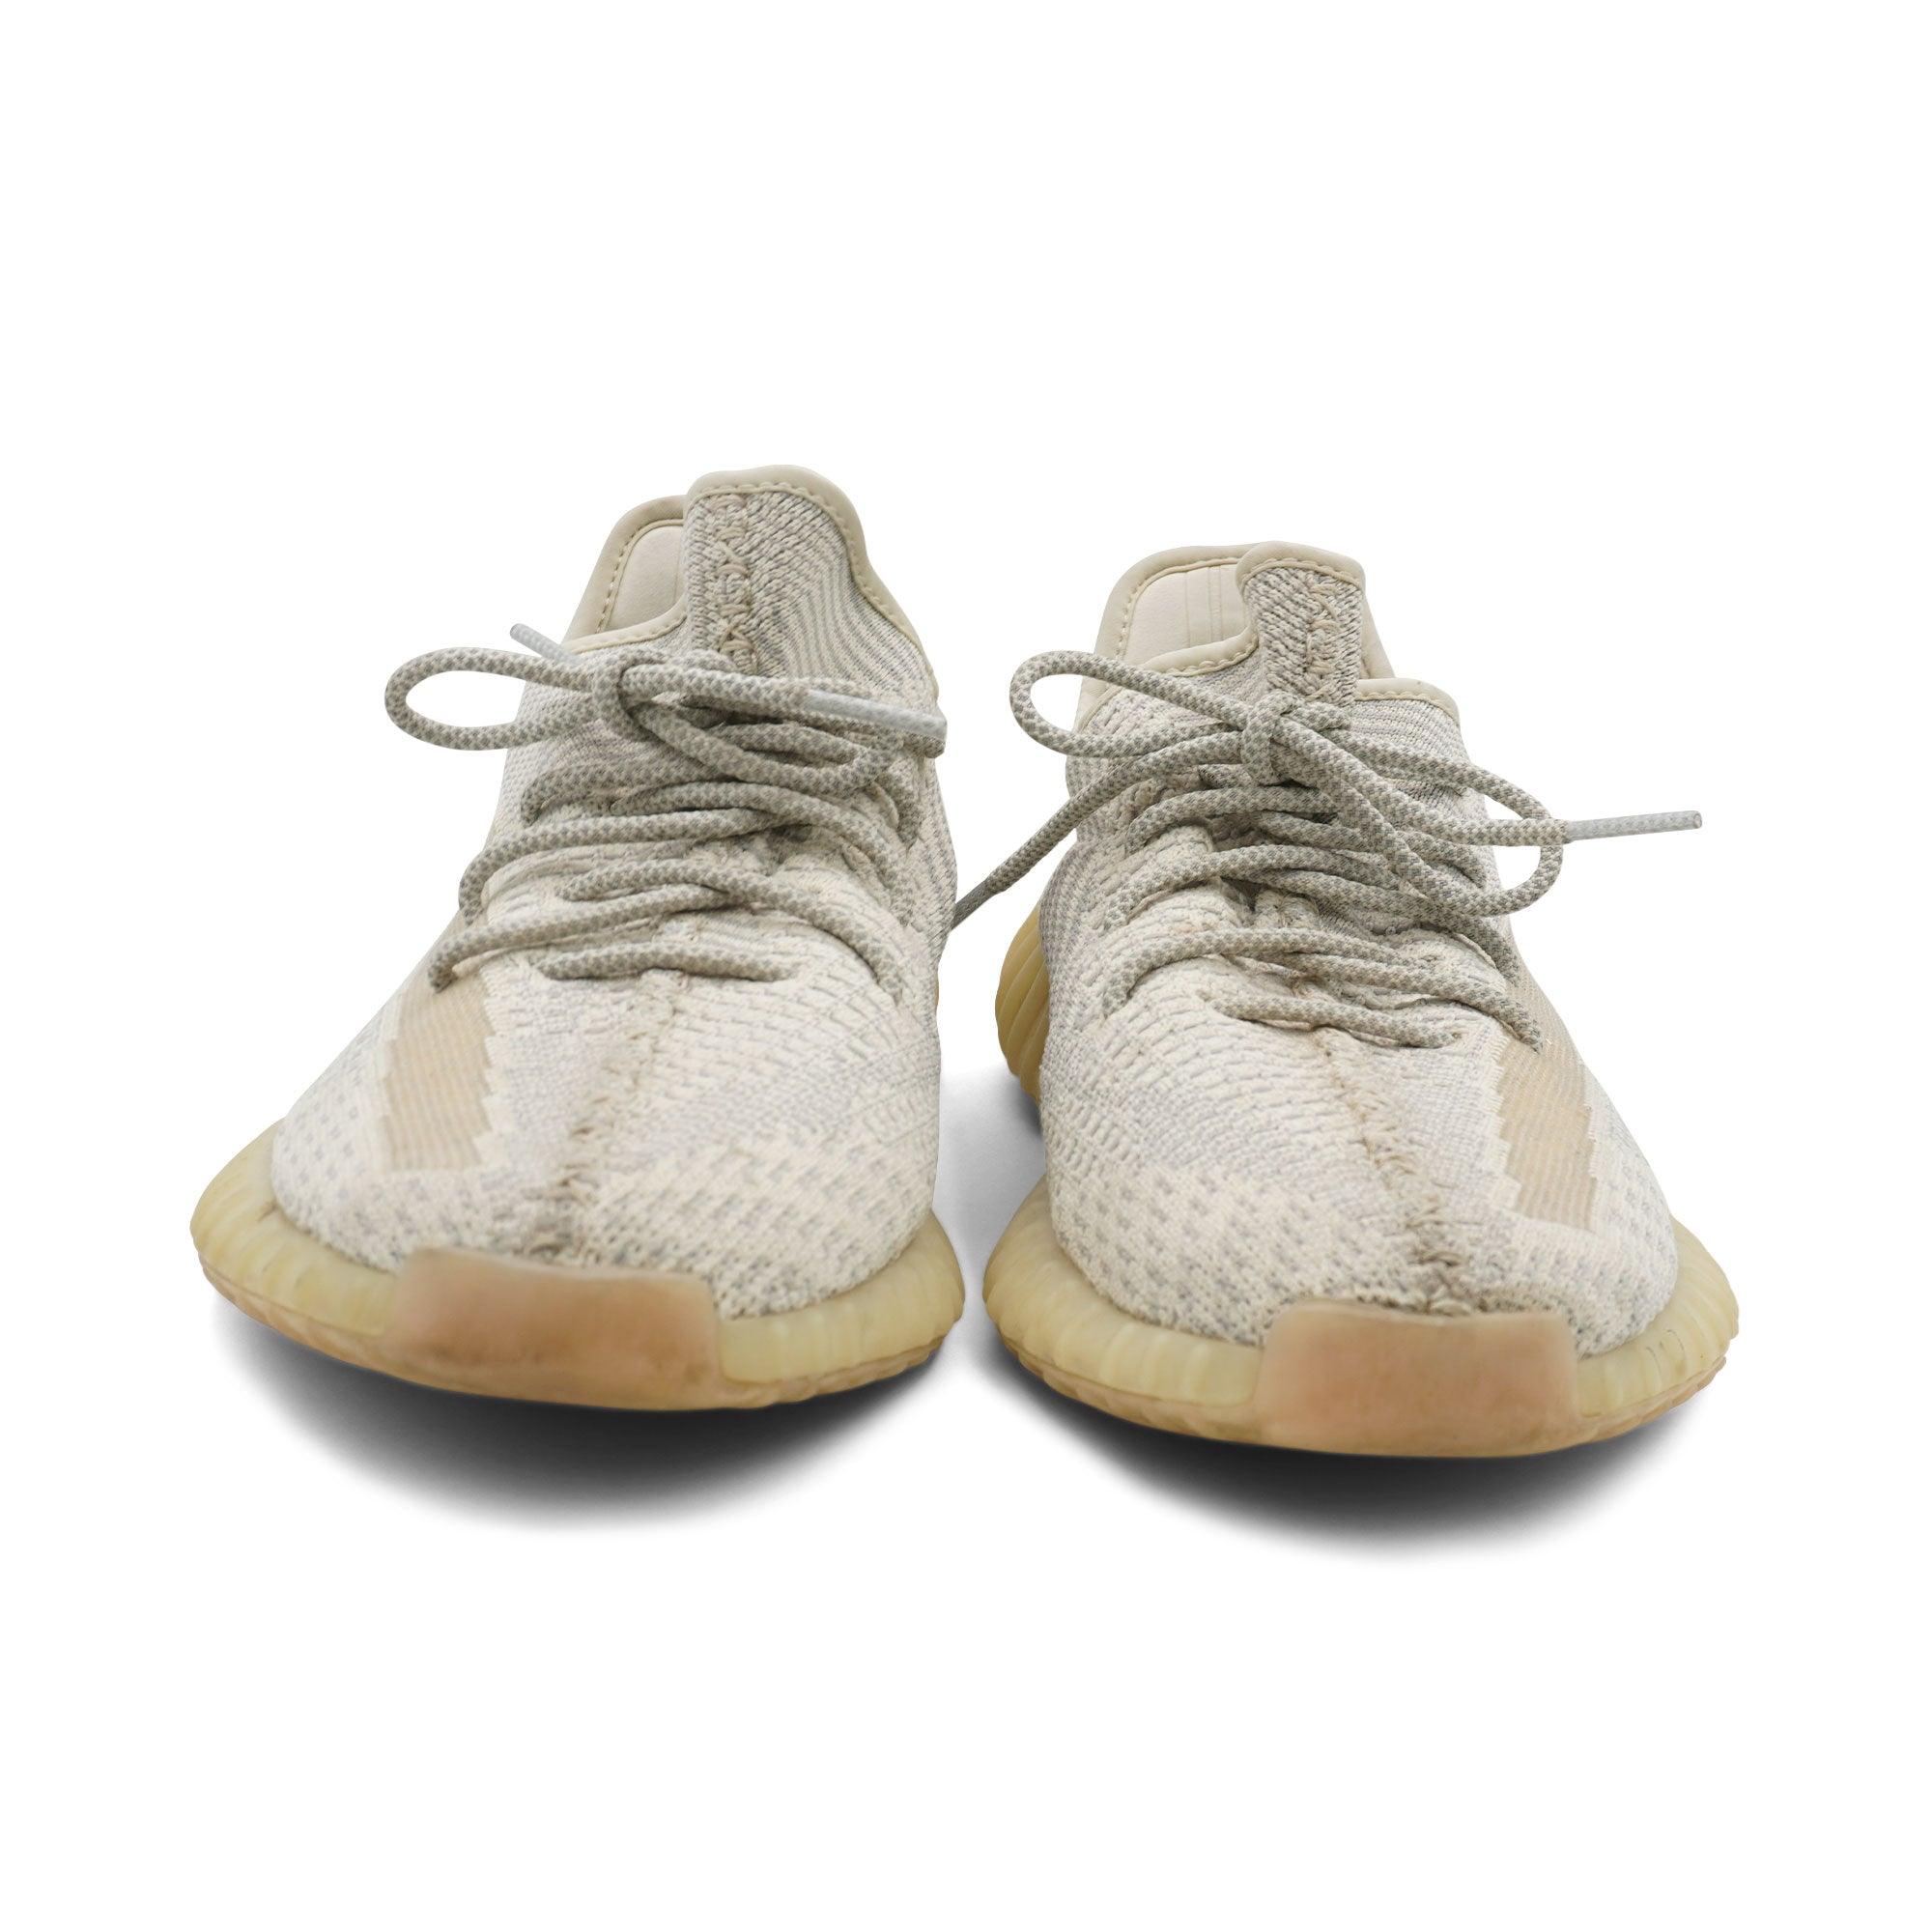 Yeezy 'Boost 350 V2' Sneakers - Men's 10.5 - Fashionably Yours